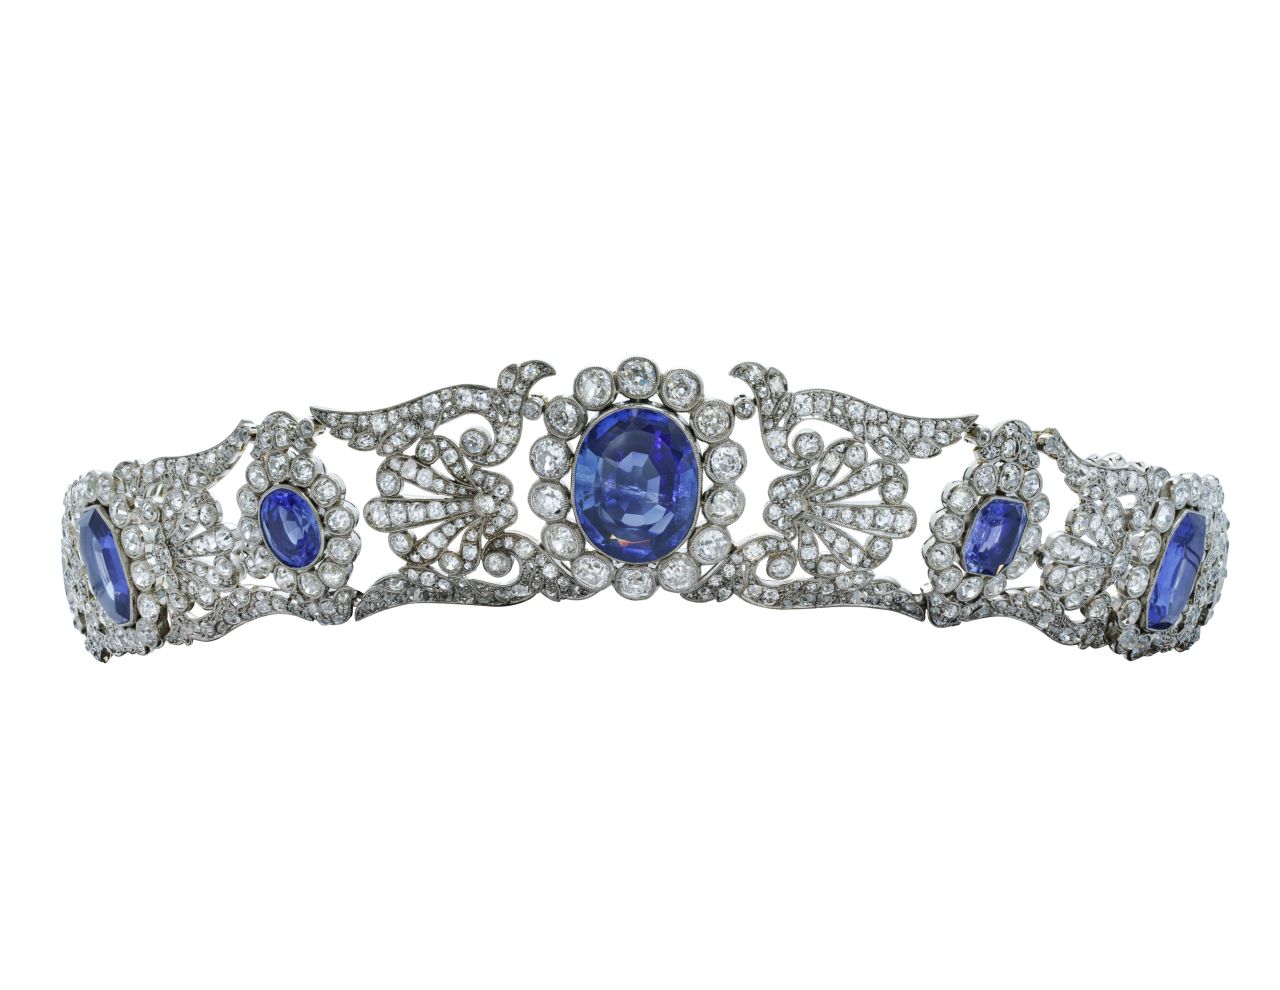 The tiara was once a belt but was refashioned by the grand duchess's daughter.